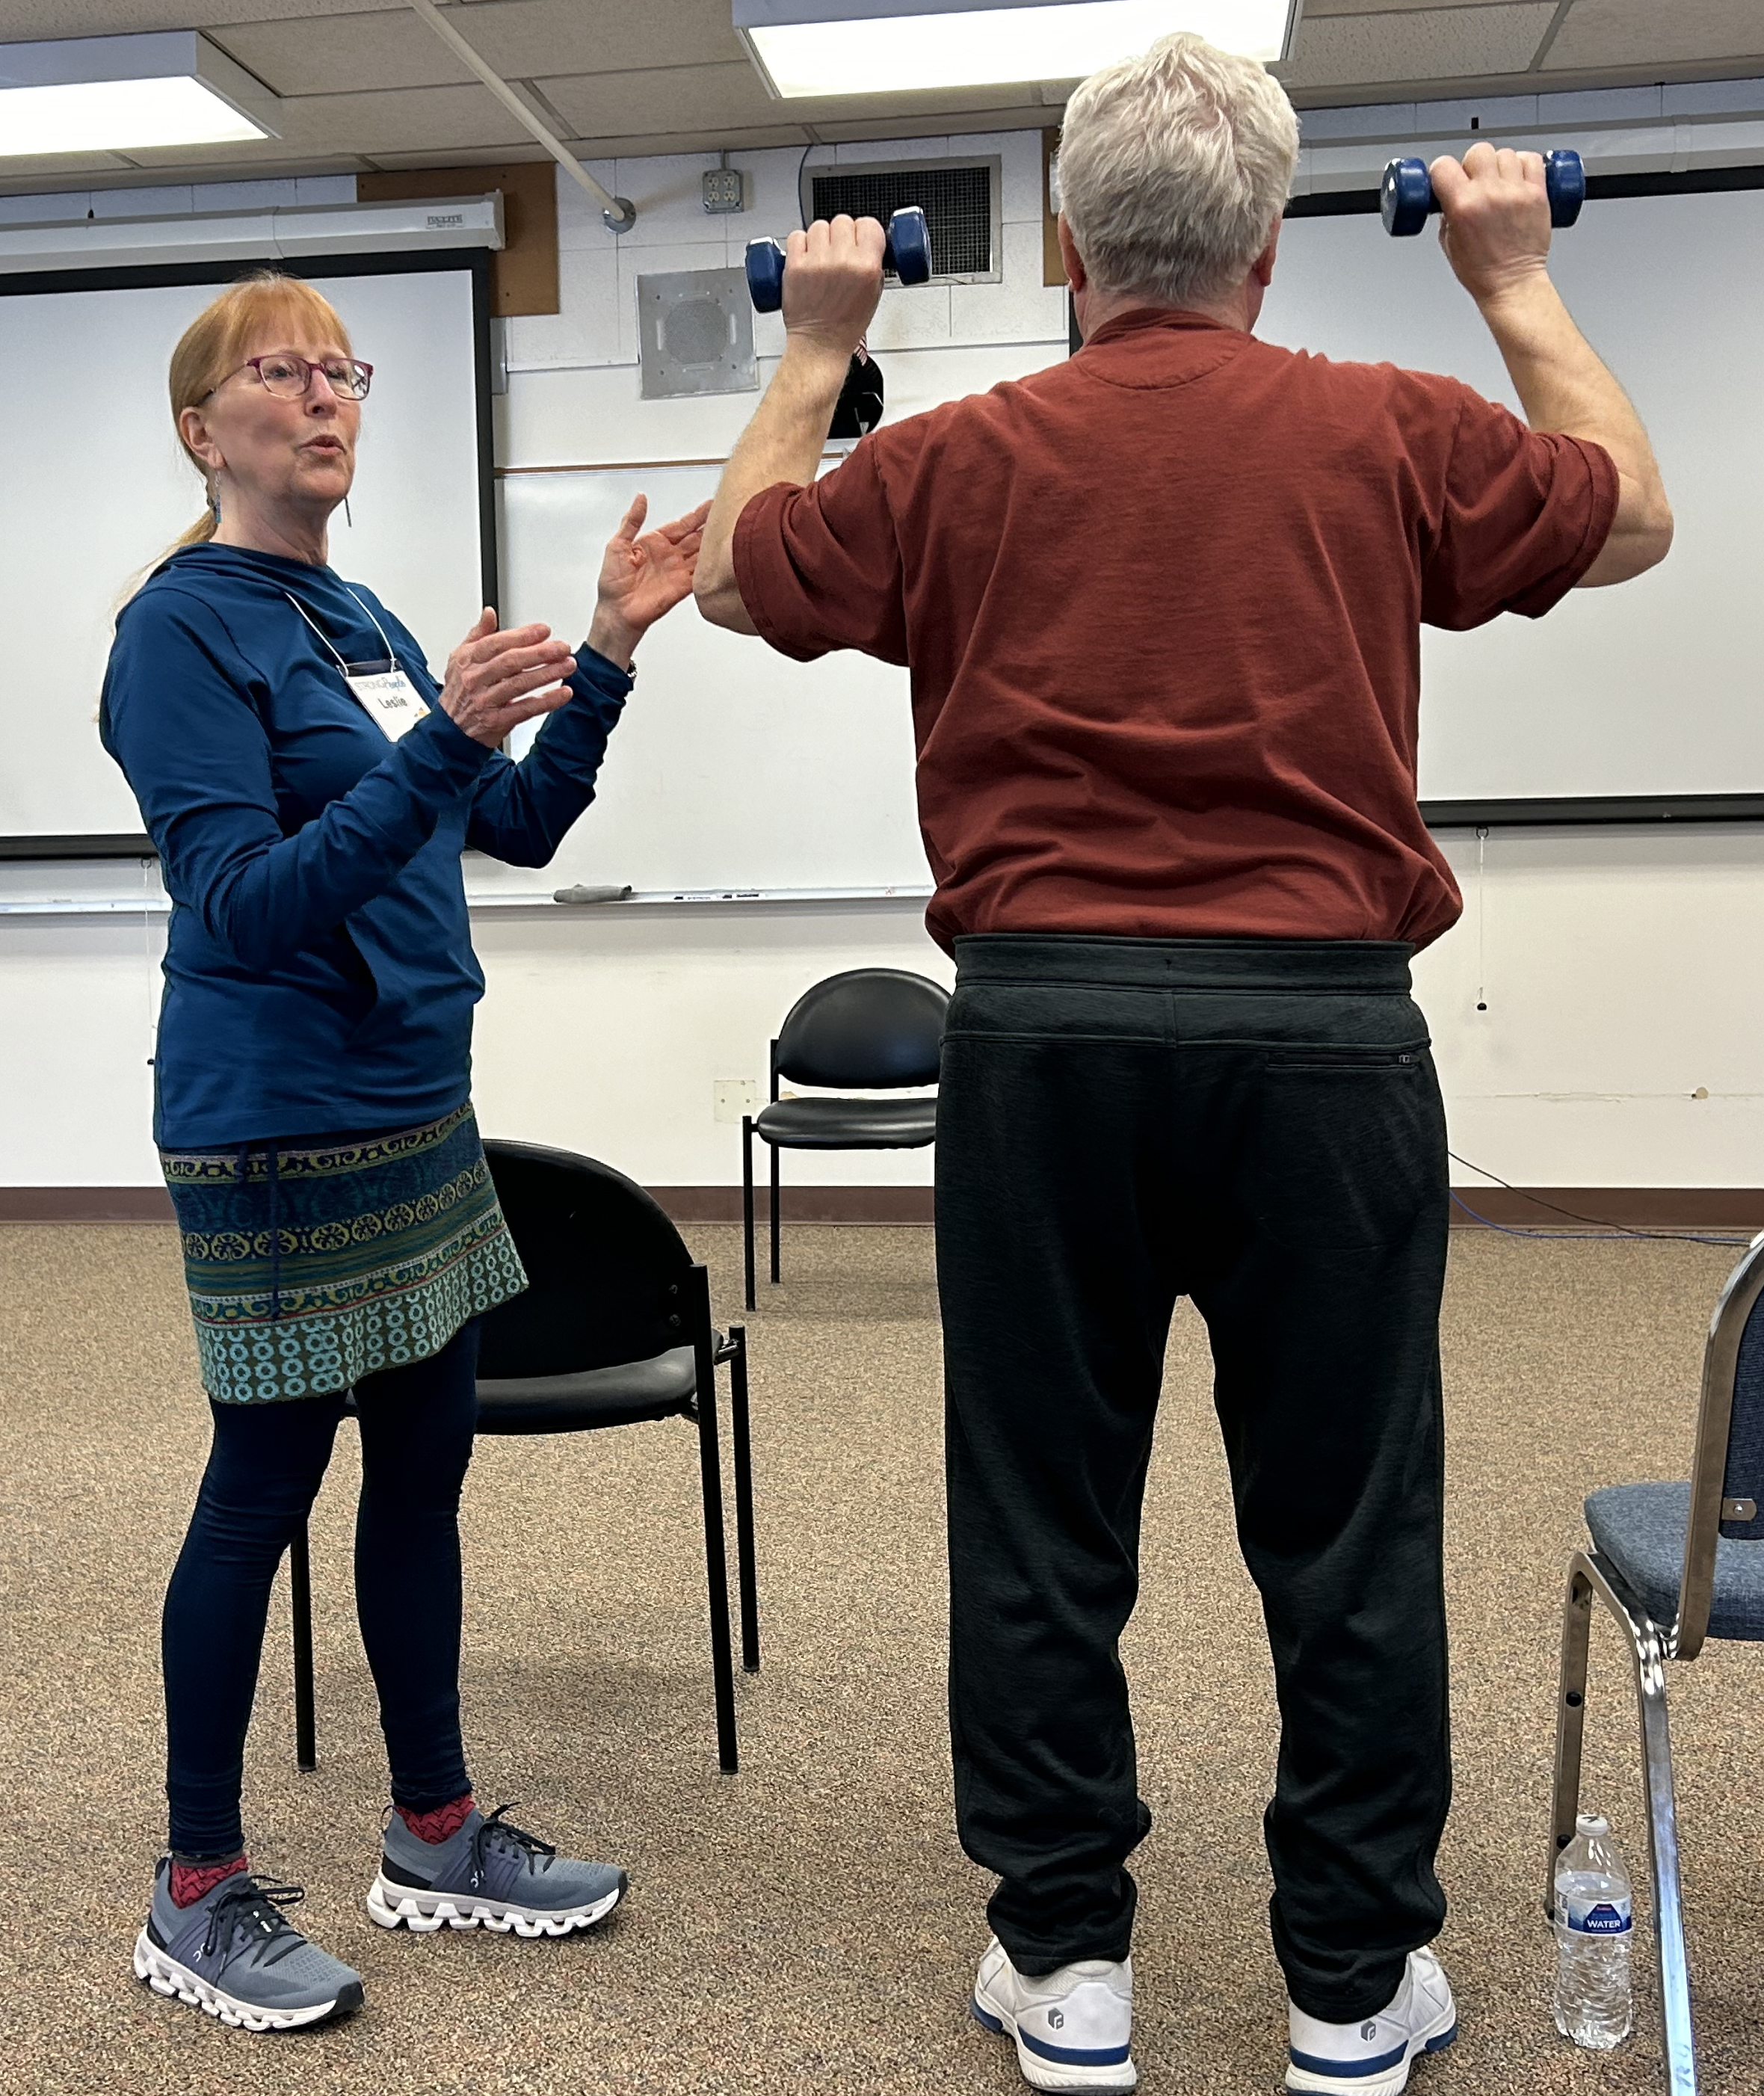 A woman coaches a man with weights in his hands in exercise.